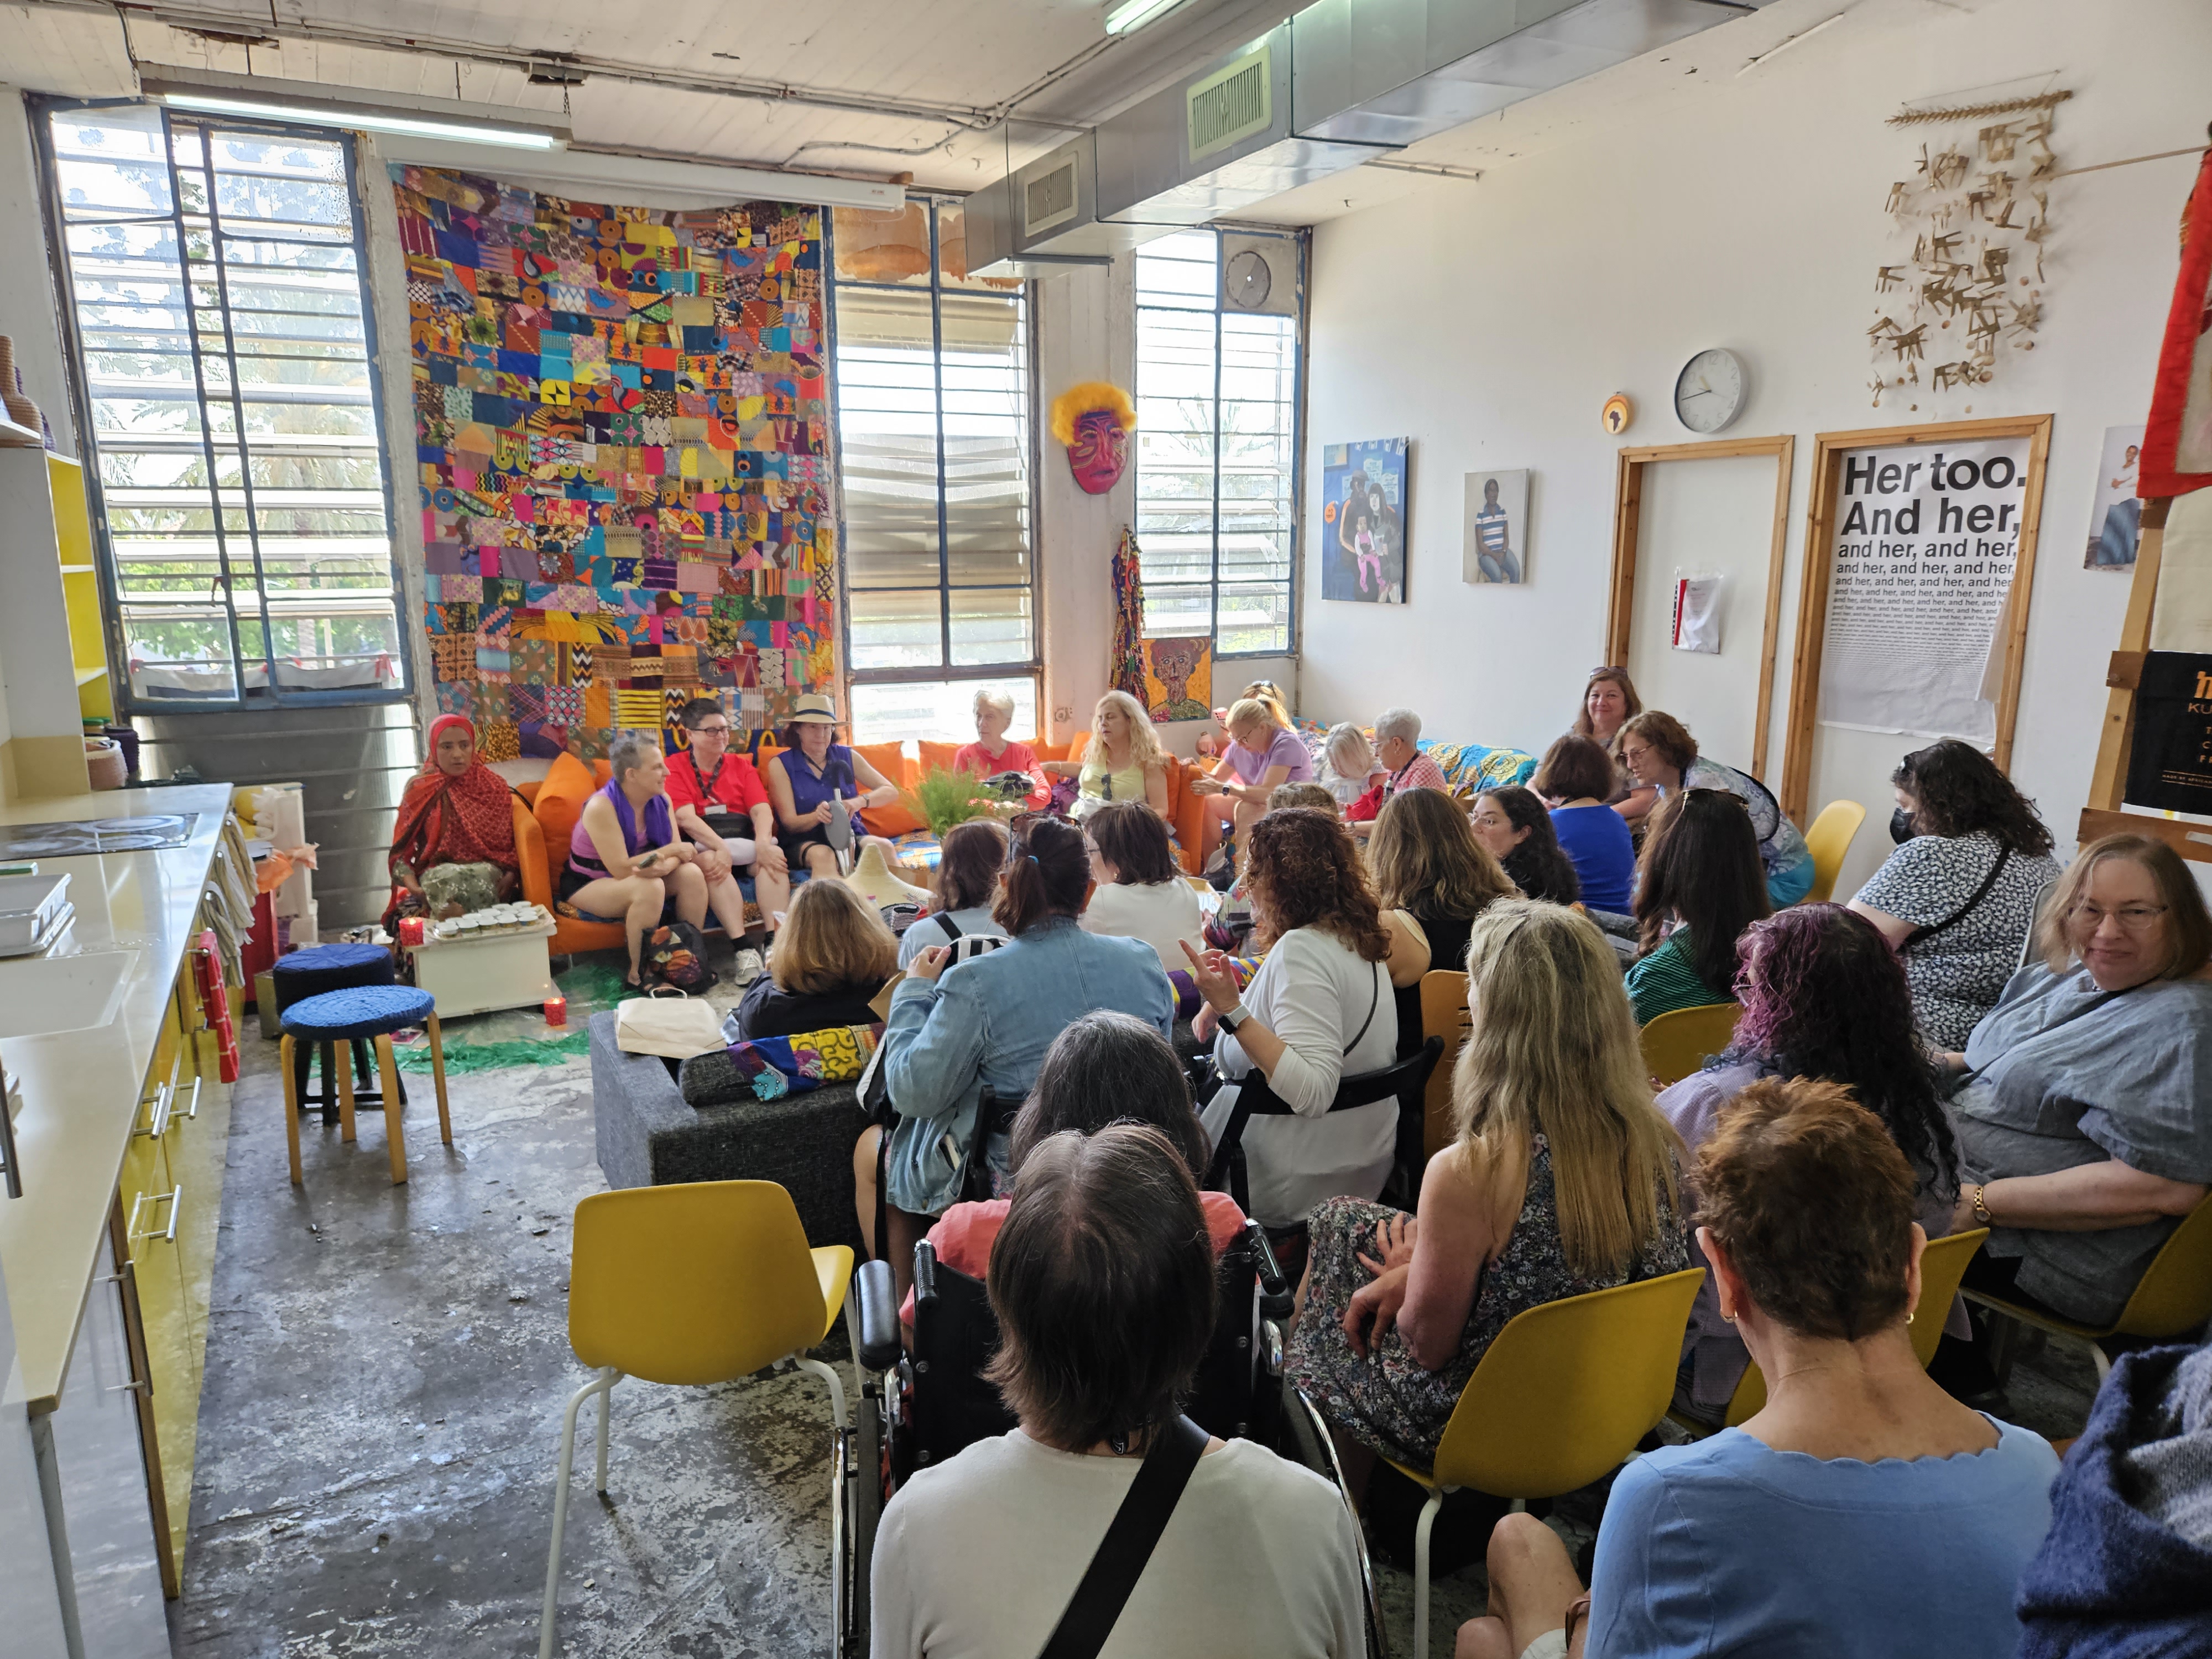 Women learning about Kuchinate, an Israeli business that sells crocheted items to support the African asylum-seeking community and supports